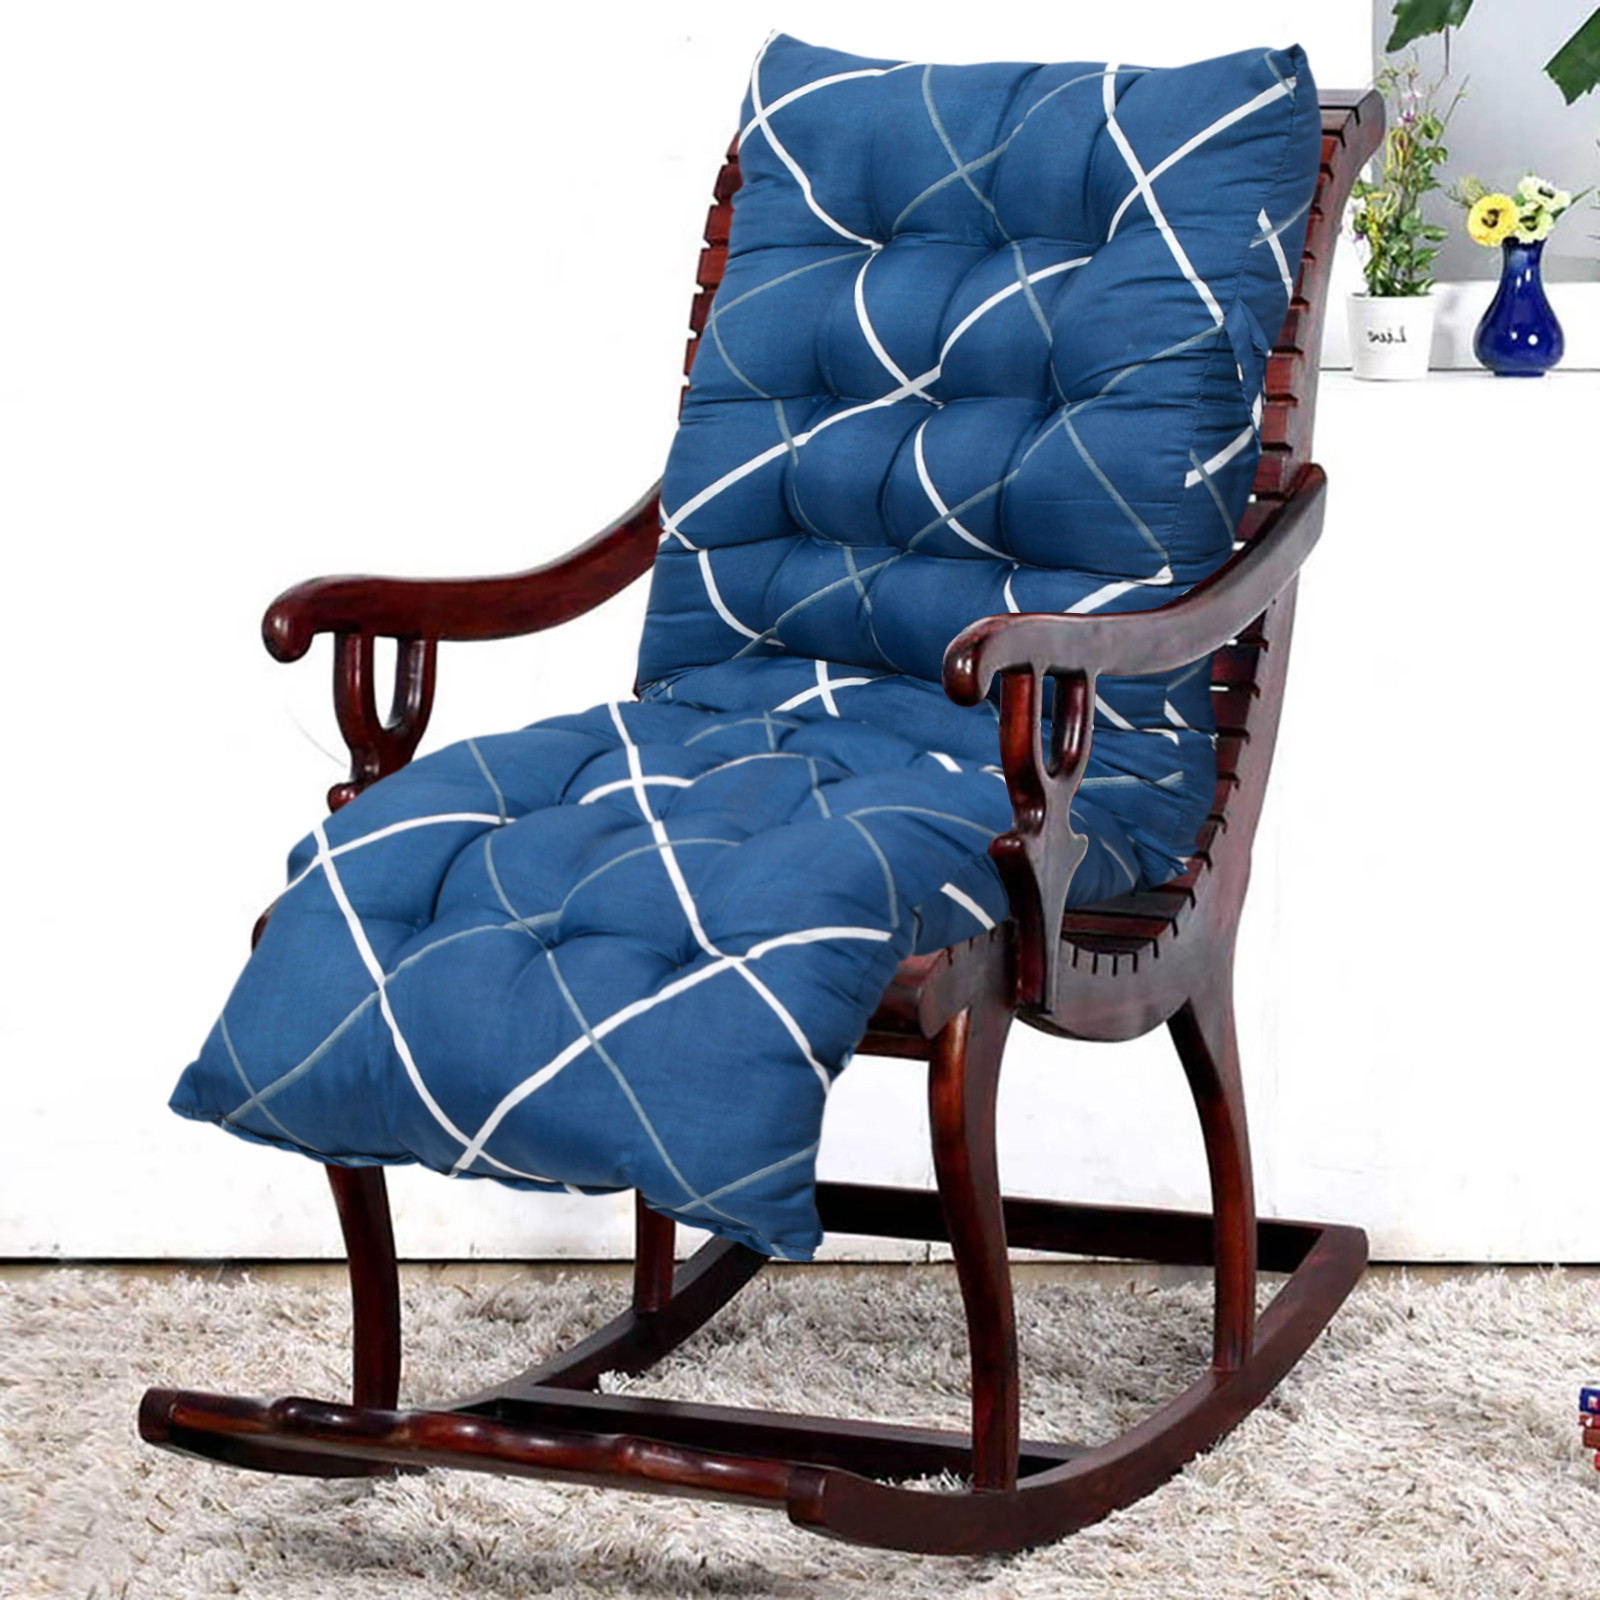 Kuber Industries Geomatric Printed Microfiber Back & Seat Cushion for Indoor/Outdoor Patio Chair, Rocking Chair, Office Chair, Reclining chairs With Ties, 18*46 Inch (Blue)